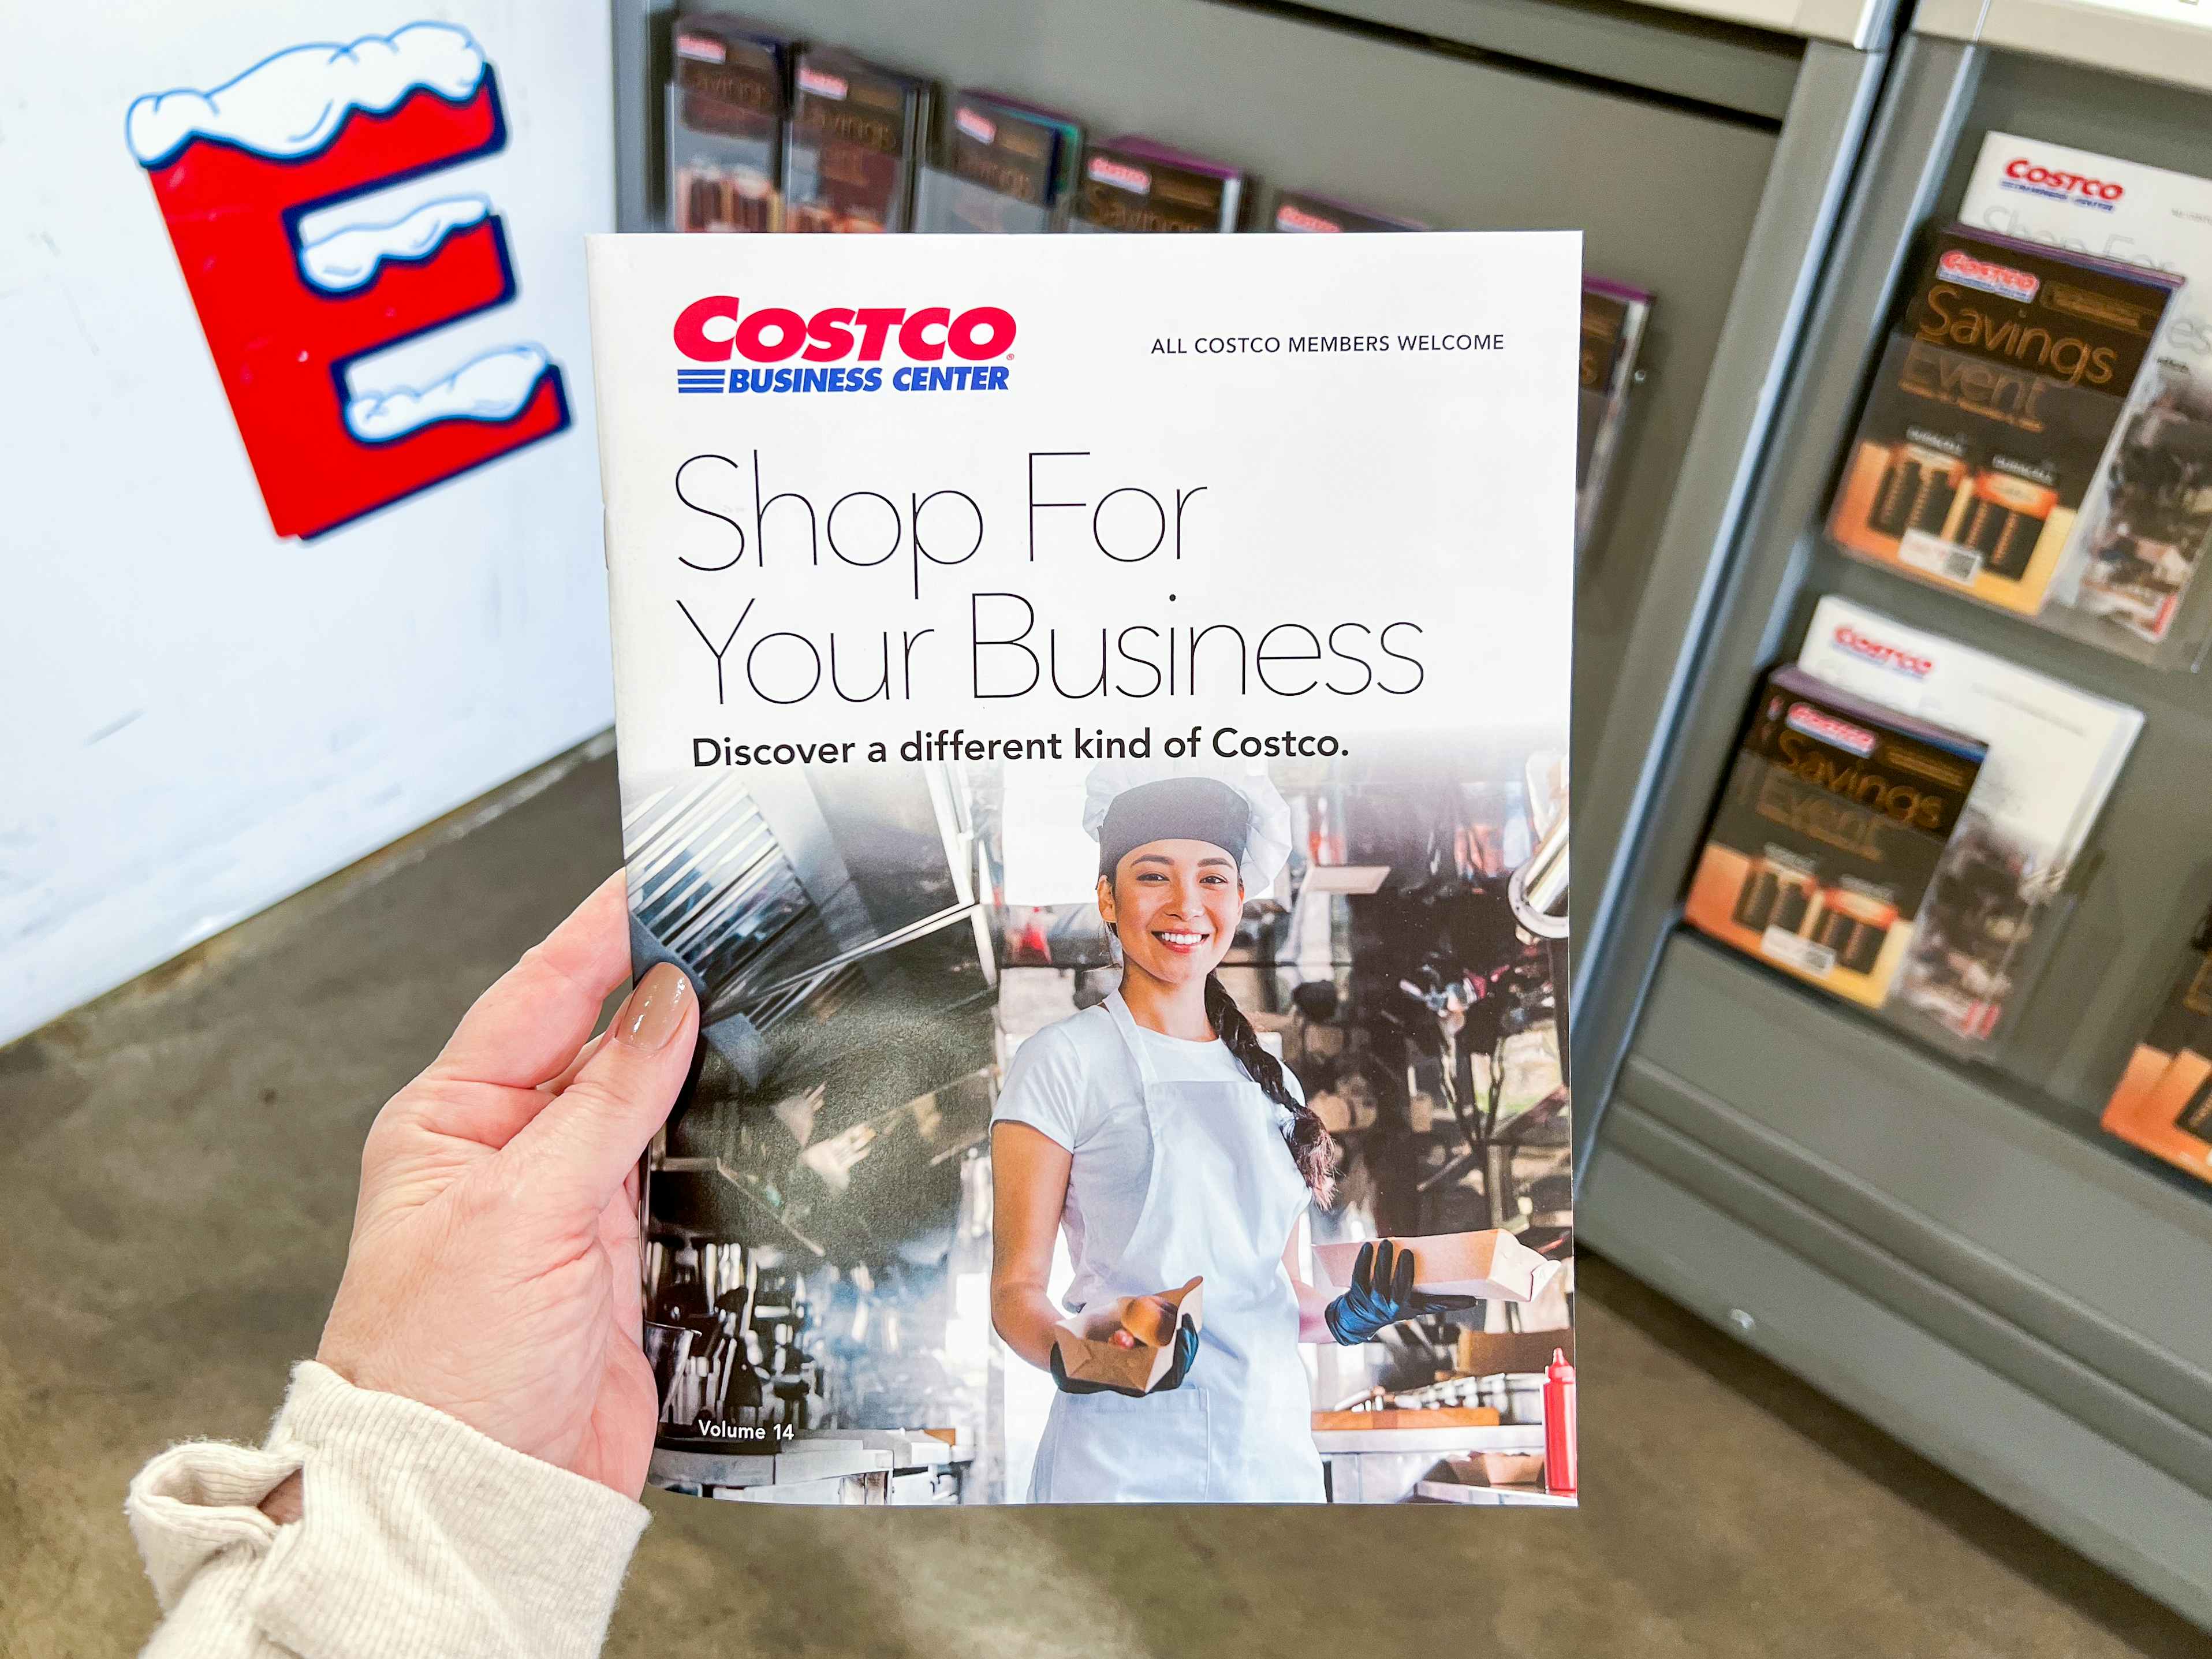 A person holding up a Costco Business Center booklet that says "Shop for your business" and "All Costco Members welcome